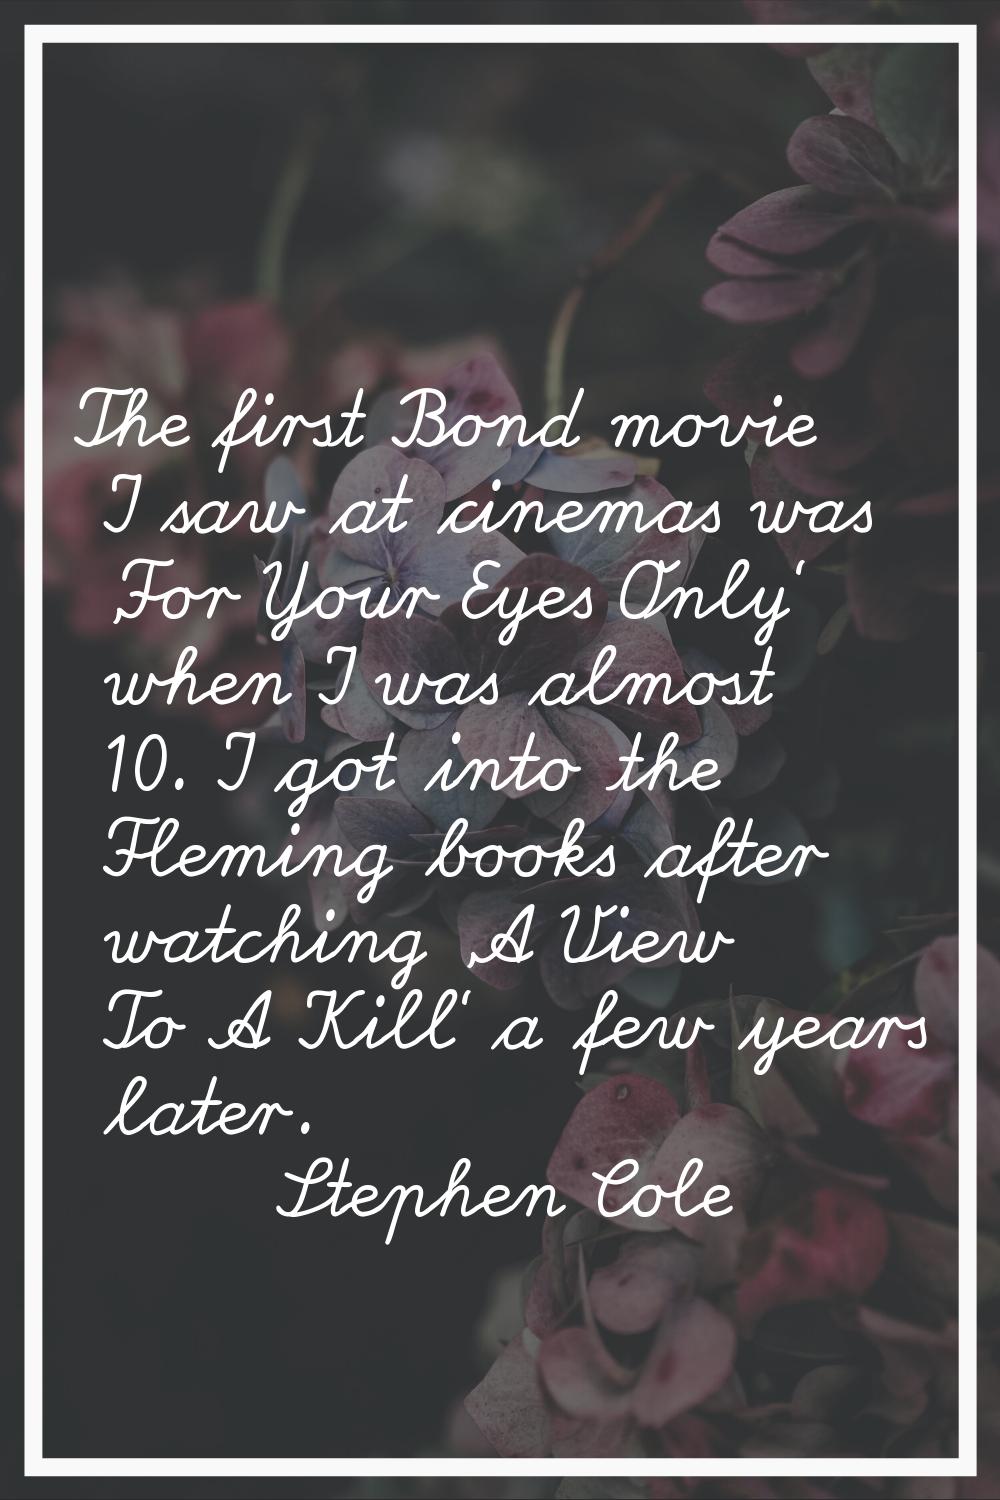 The first Bond movie I saw at cinemas was 'For Your Eyes Only' when I was almost 10. I got into the